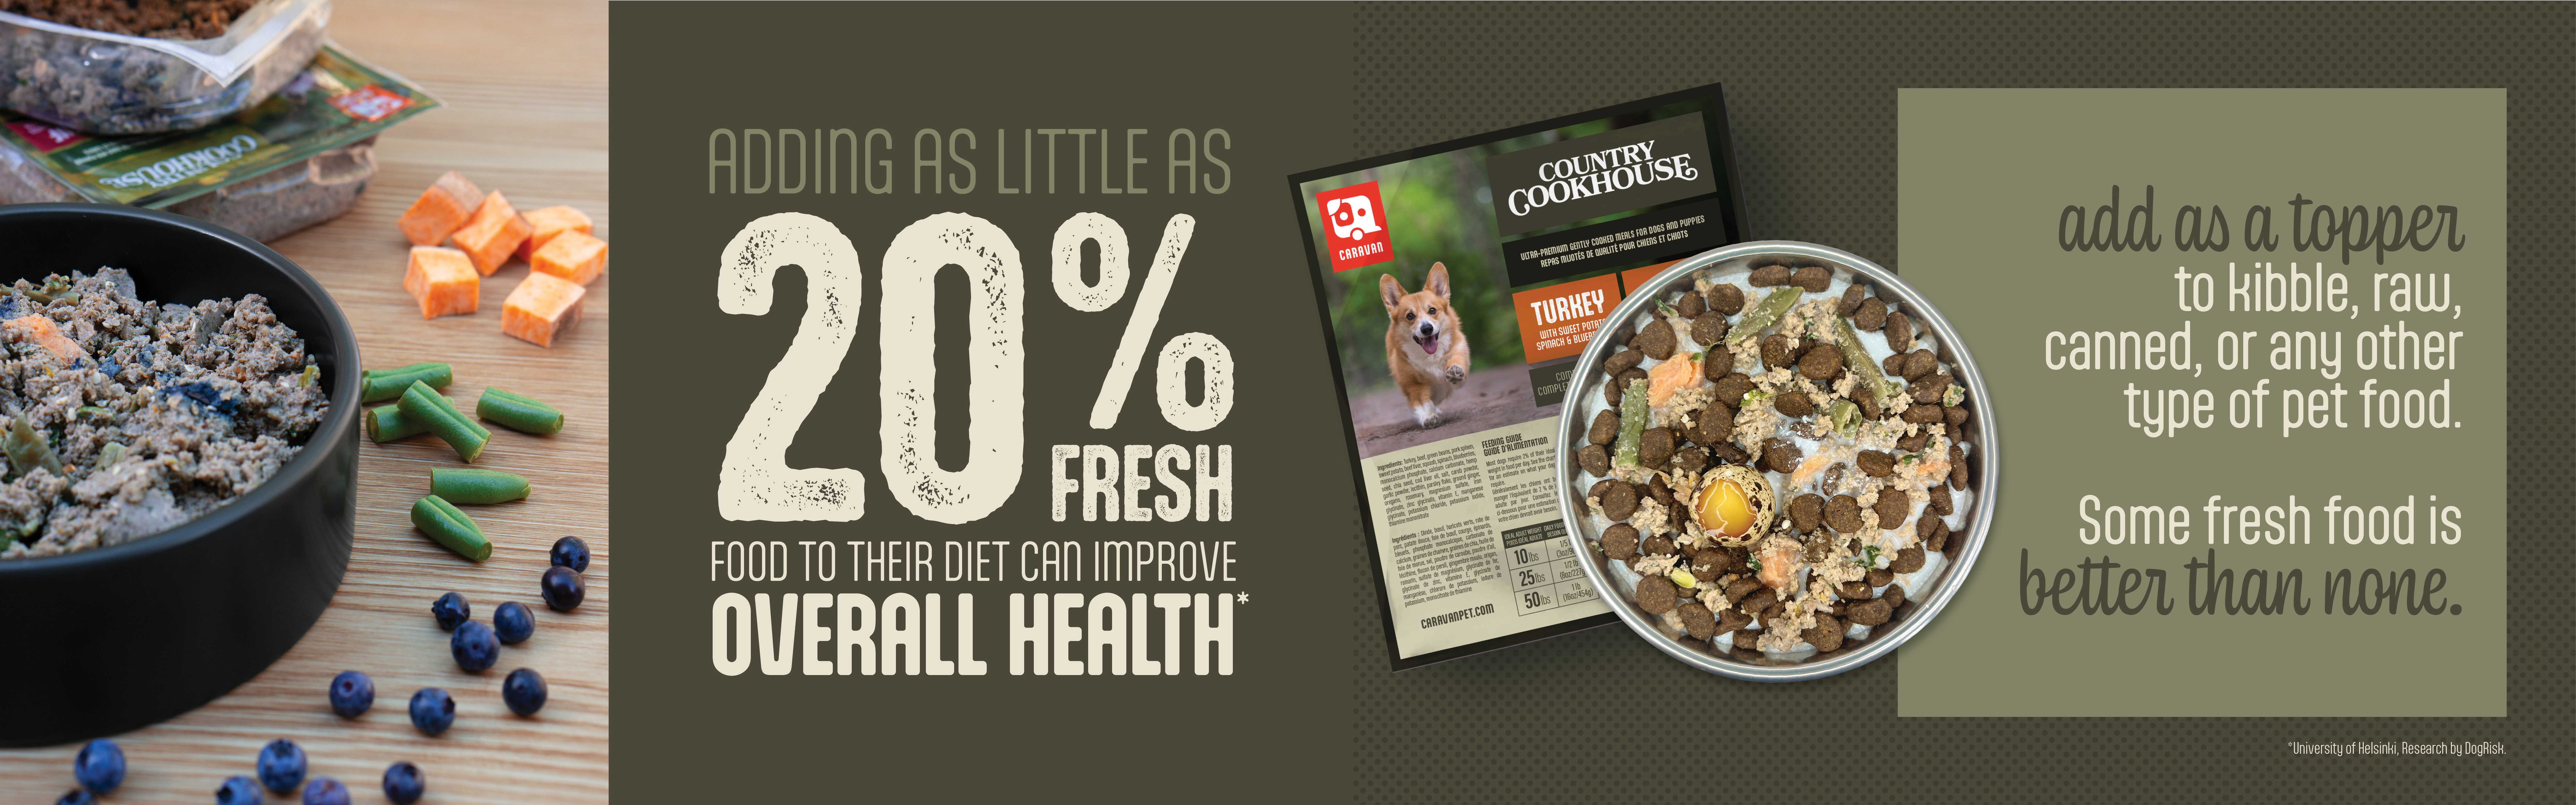 Adding as little as 20% fresh food to their diet can improve overall health - add as a topper to kibble, raw, canned, or any other type of pet food. Some fresh food is better than none.